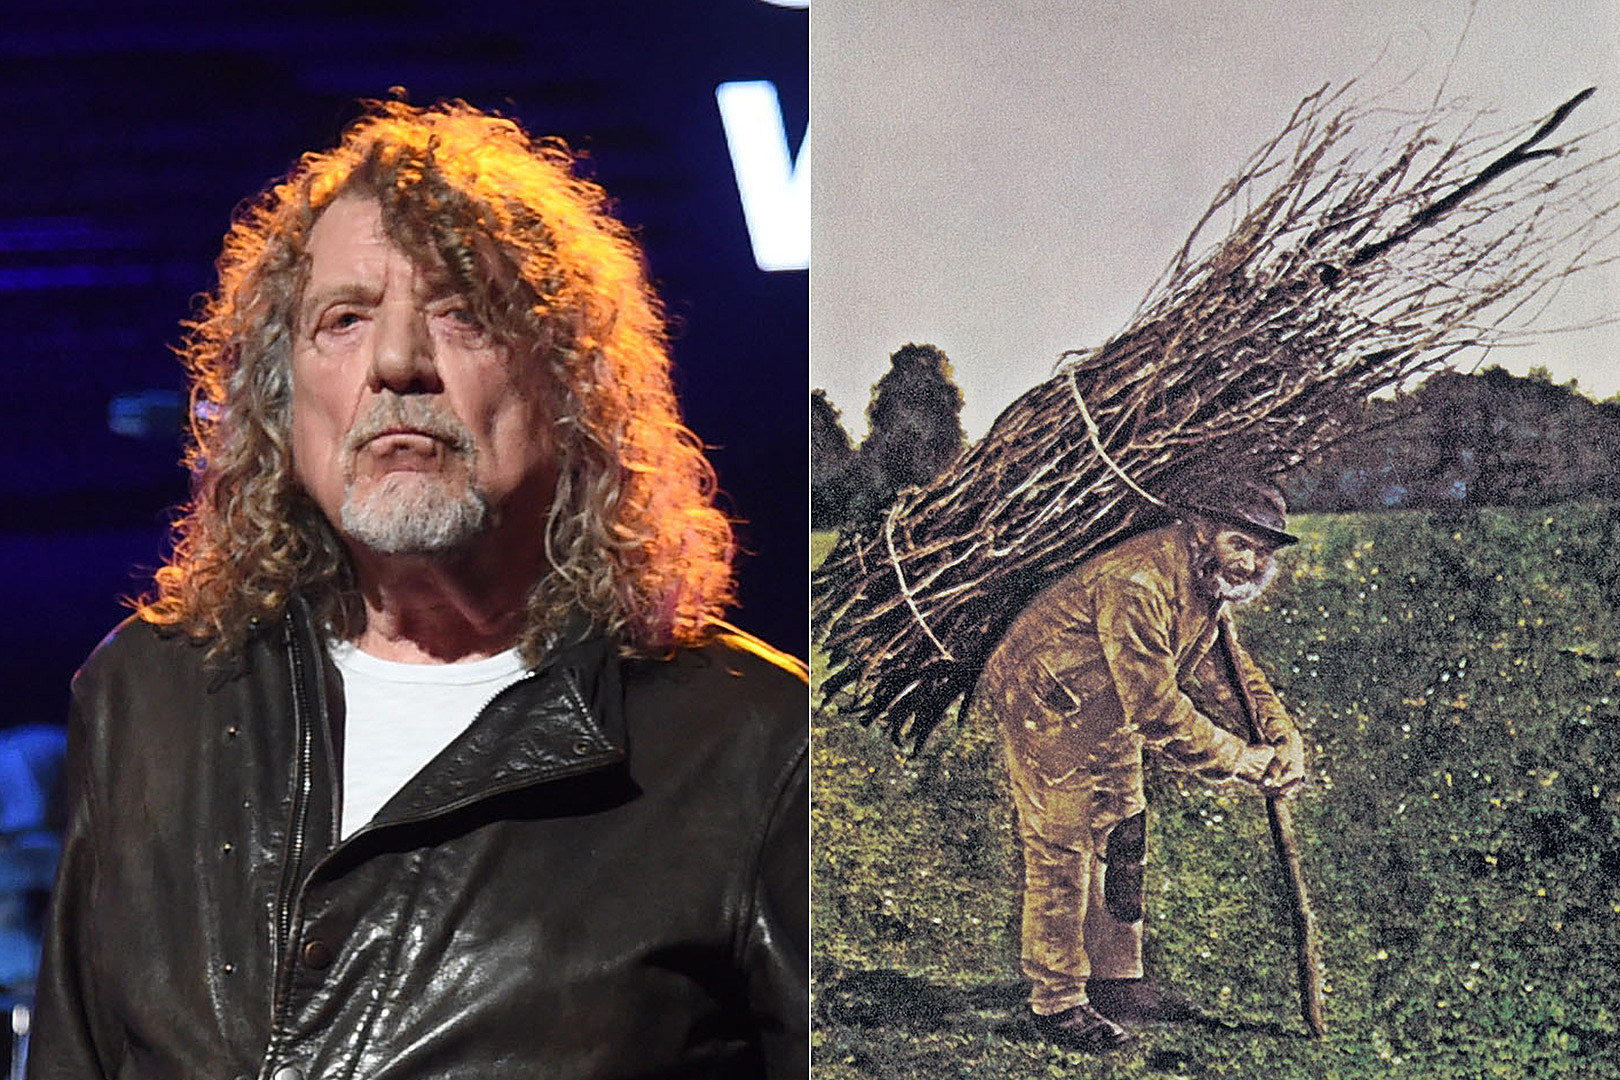 Robert Plant Feels He's Become the Guy on 'IV' Album